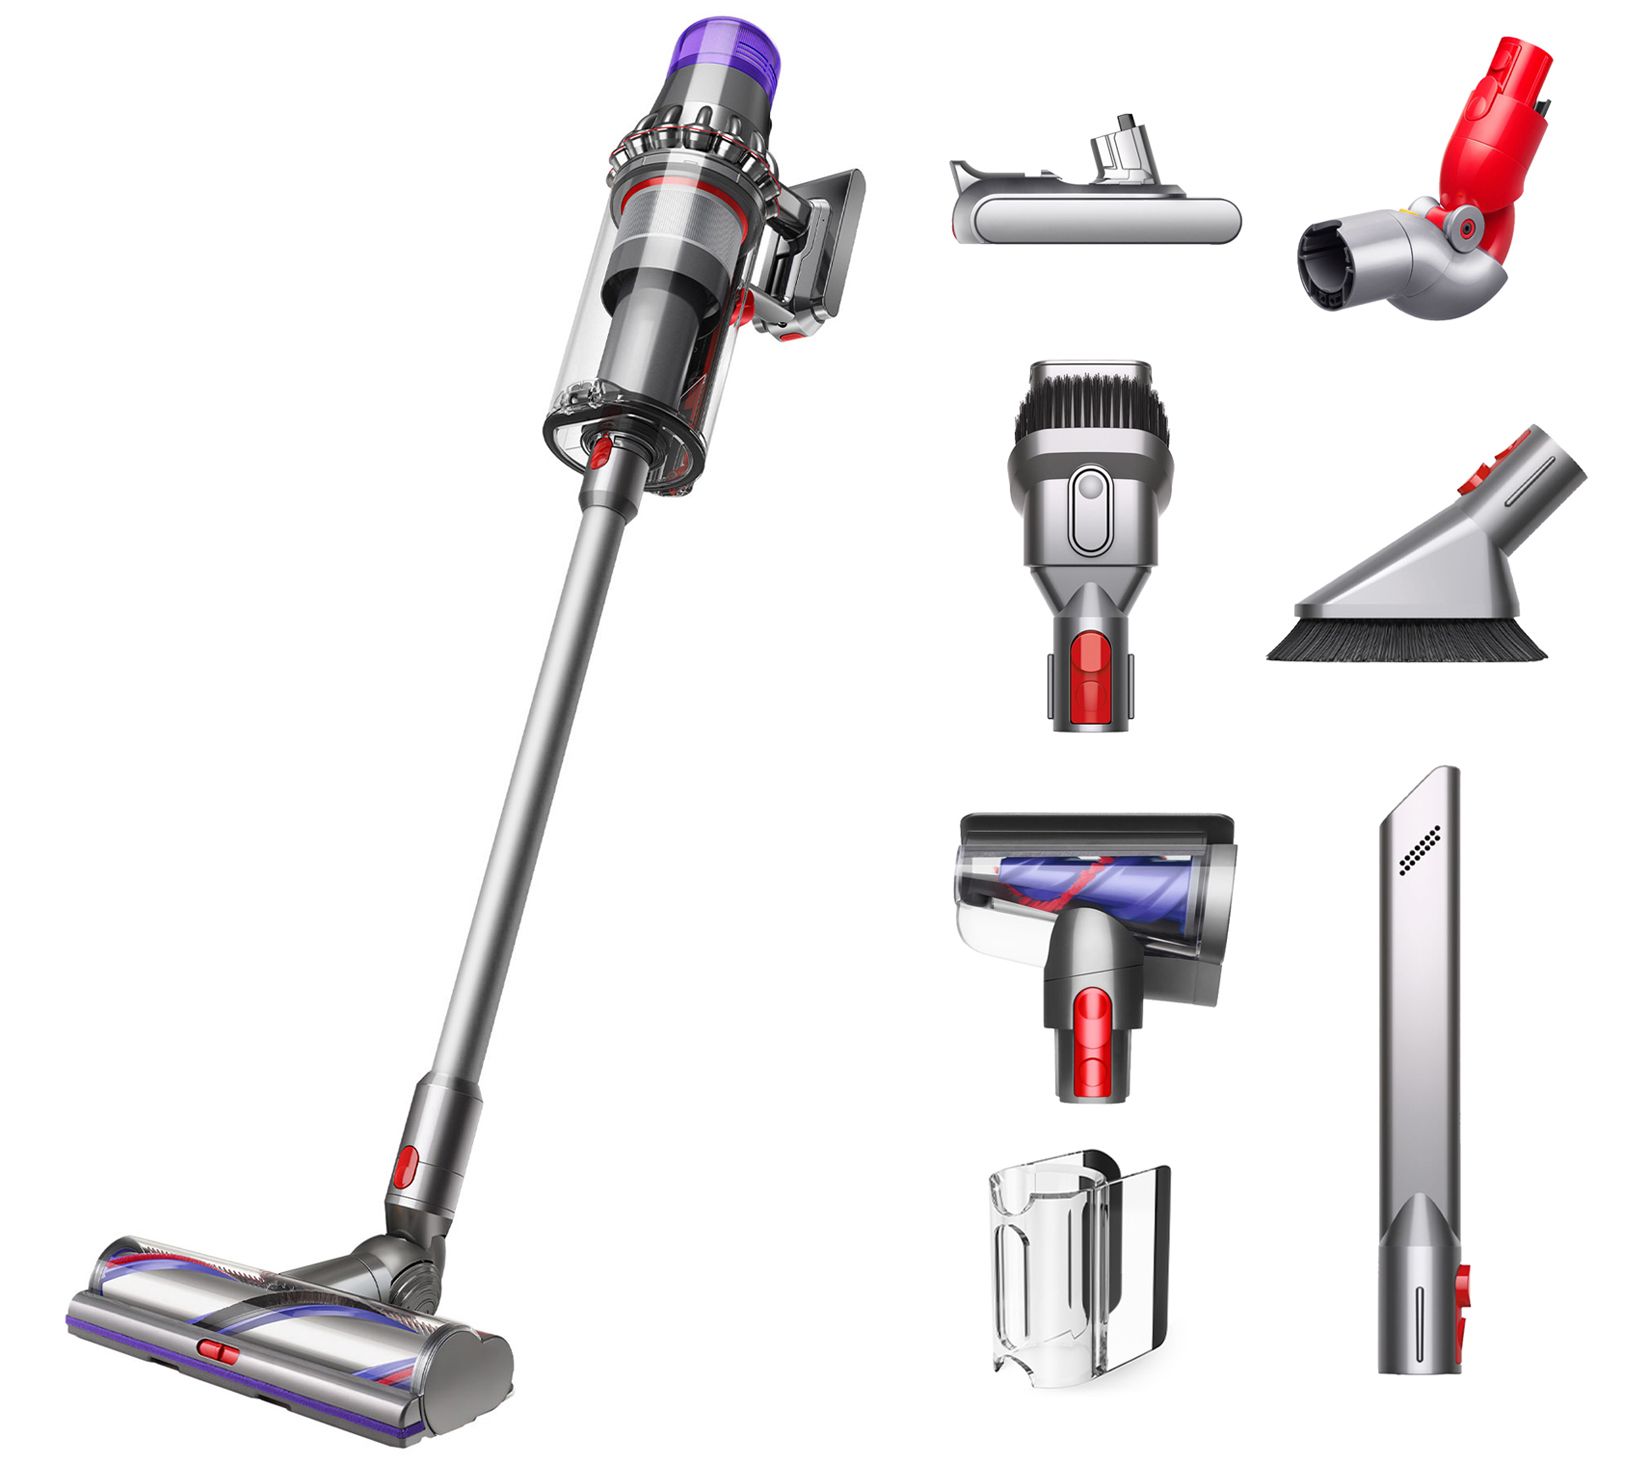 Dyson V10 Absolute Cordless Vacuum | Copper | New